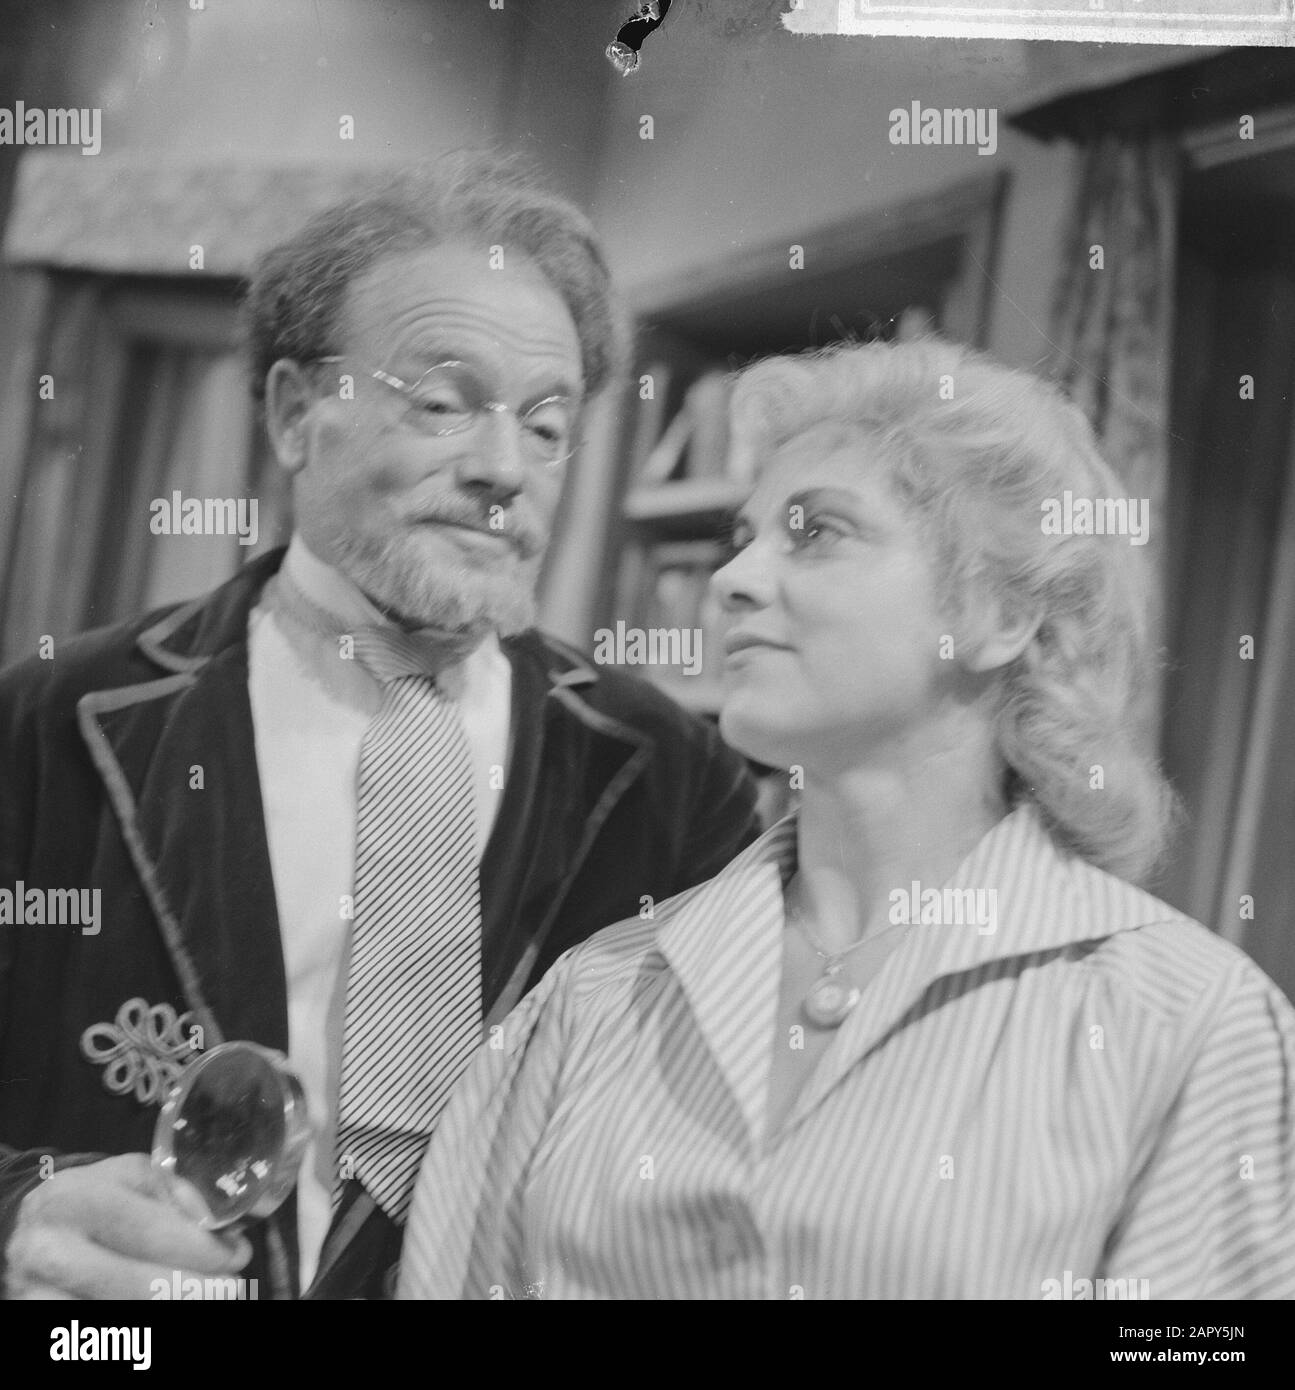 He sits at the crucible, a TV game of VPRO. Max Croiset as Professor Mensch and Emmy Lopes Dias as Mrs. Schmidt Annotation: After a play by Kaj Munk Date: 17 October 1962 Keywords: actors, television dramas Personal name: Croiset, Max, Lopes Dias, Emmy Institutional name: VPRO Stock Photo